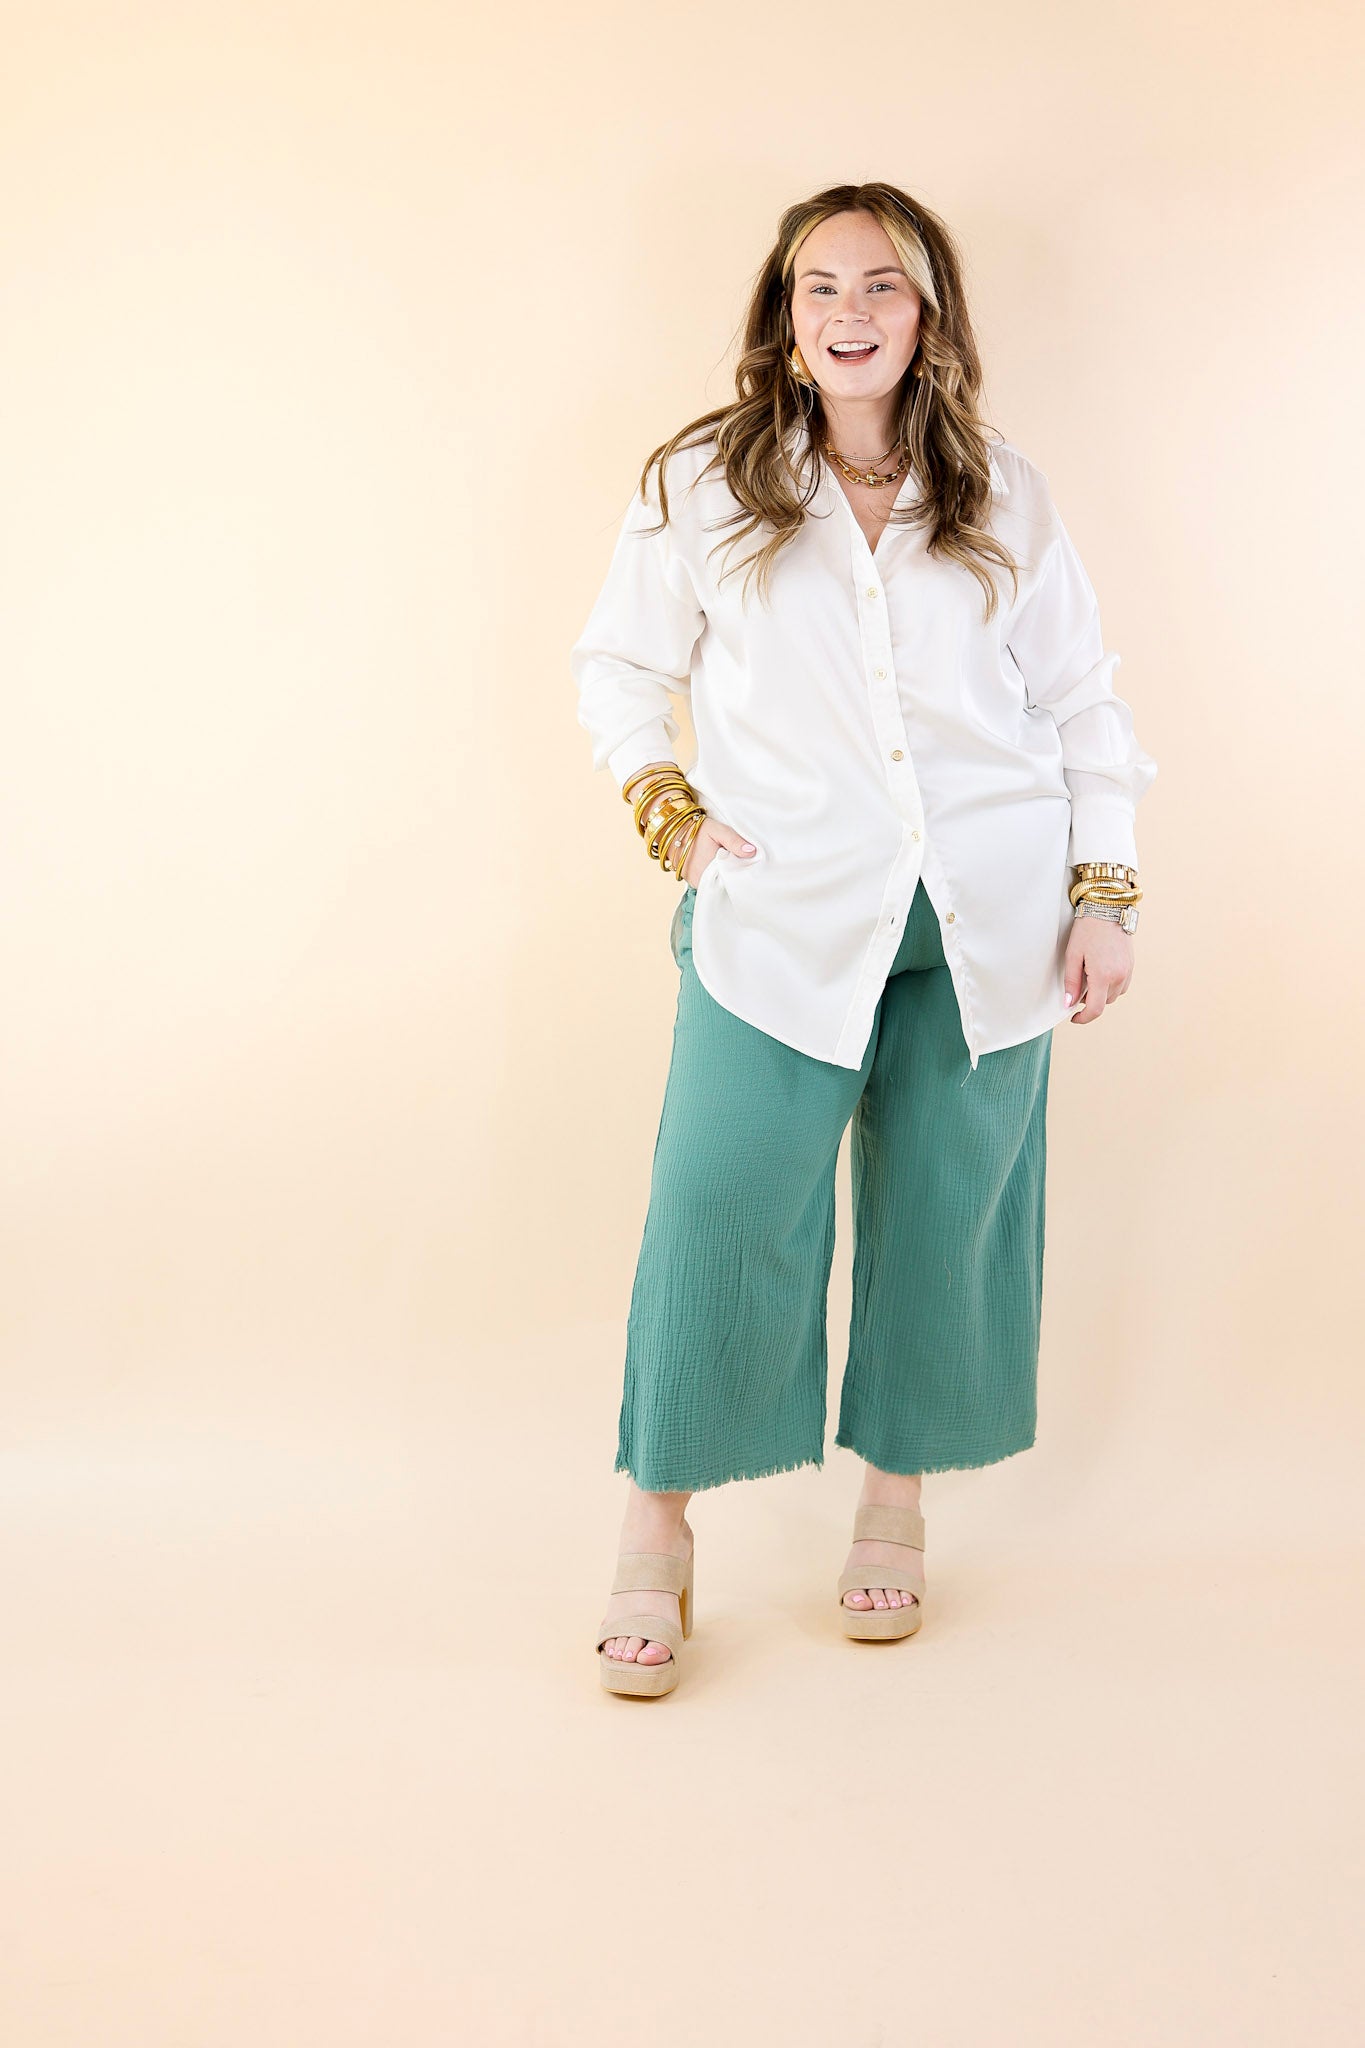 Right On Cue Elastic Waistband Cropped Pants with Frayed Hem in Dusty Green - Giddy Up Glamour Boutique